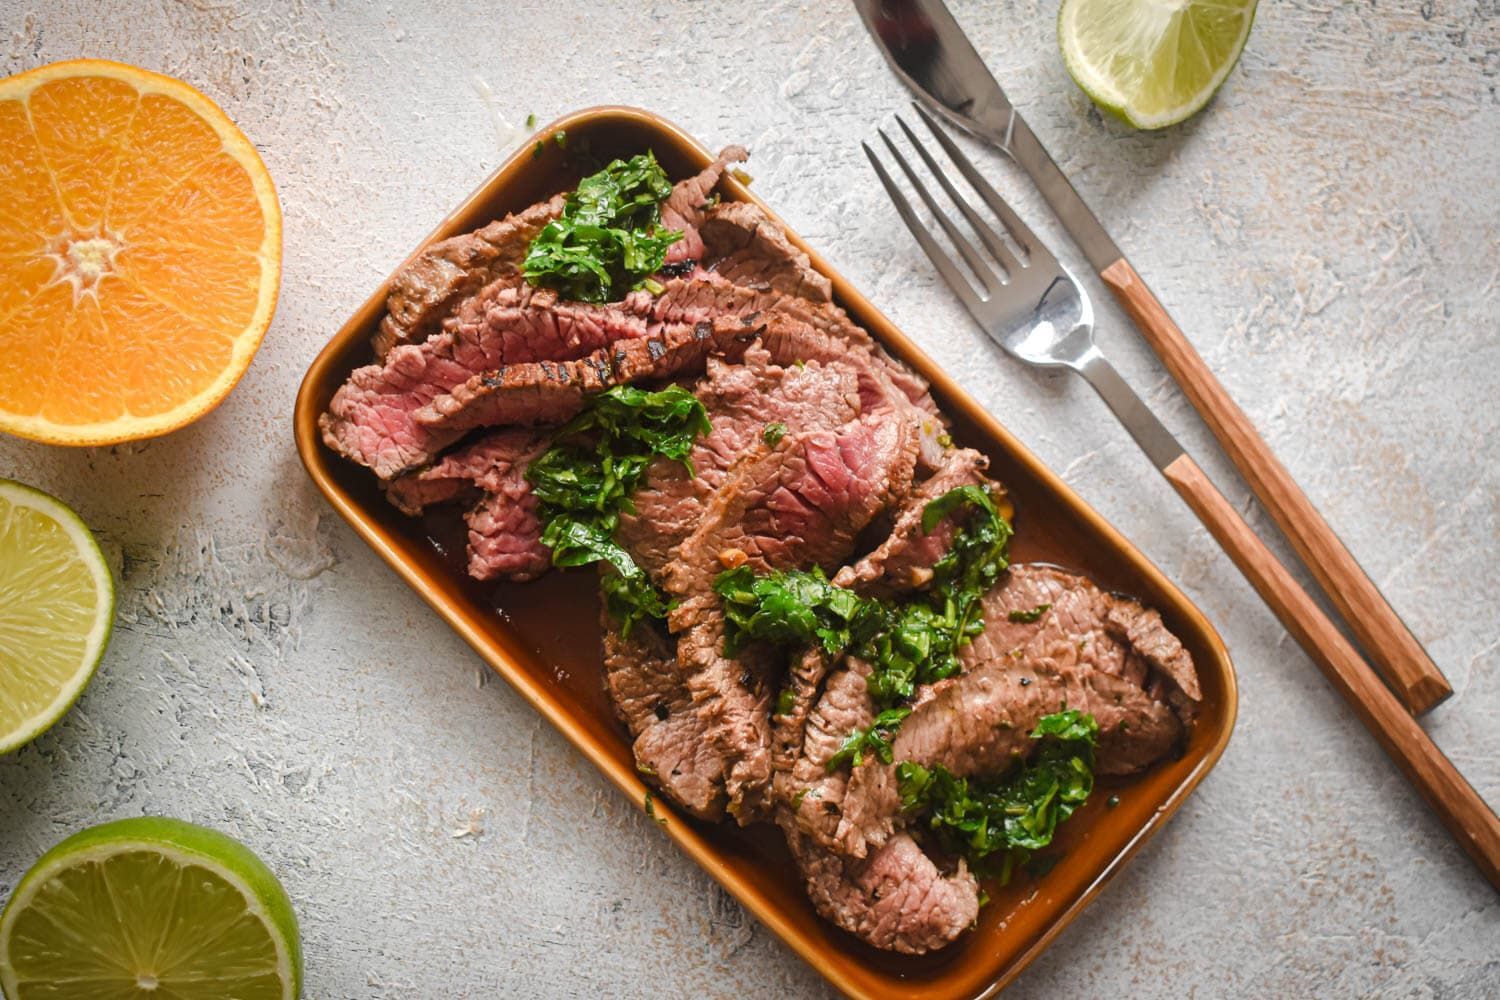 Carne asada marinated in citrus juices sliced thin on a plate with cilantro, limes, and orange slices.